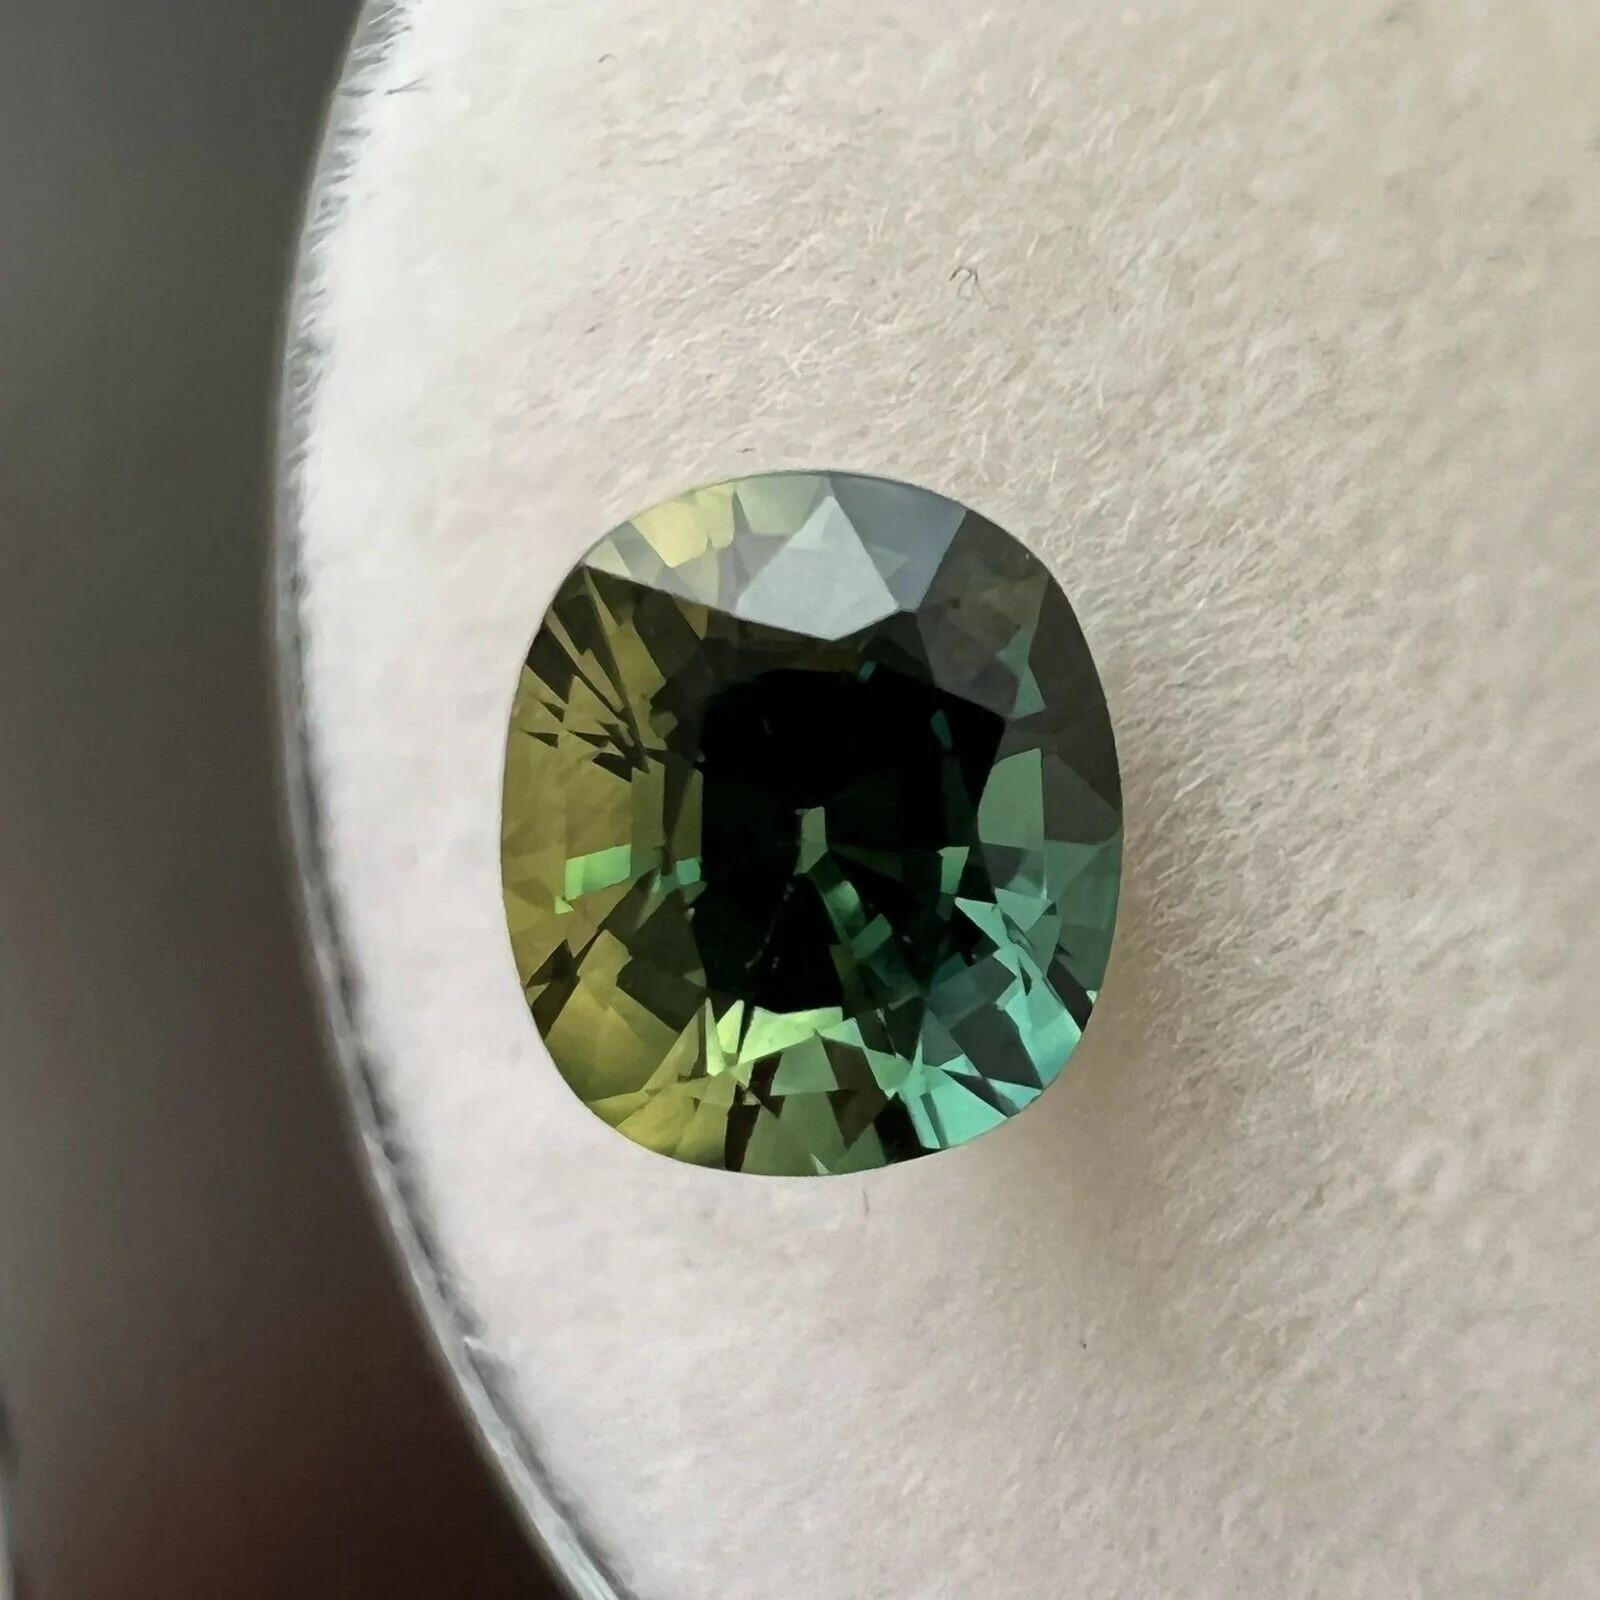 Untreated Parti Colour Sapphire 1.26ct GIA Certified Cushion Cut No Heat Gem

GIA Certified Untreated Thai Parti Colour Sapphire Gemstone.
1.26 Carat unheated sapphire with a beautiful blue-green yellow parti colour effect. Fully certified by GIA